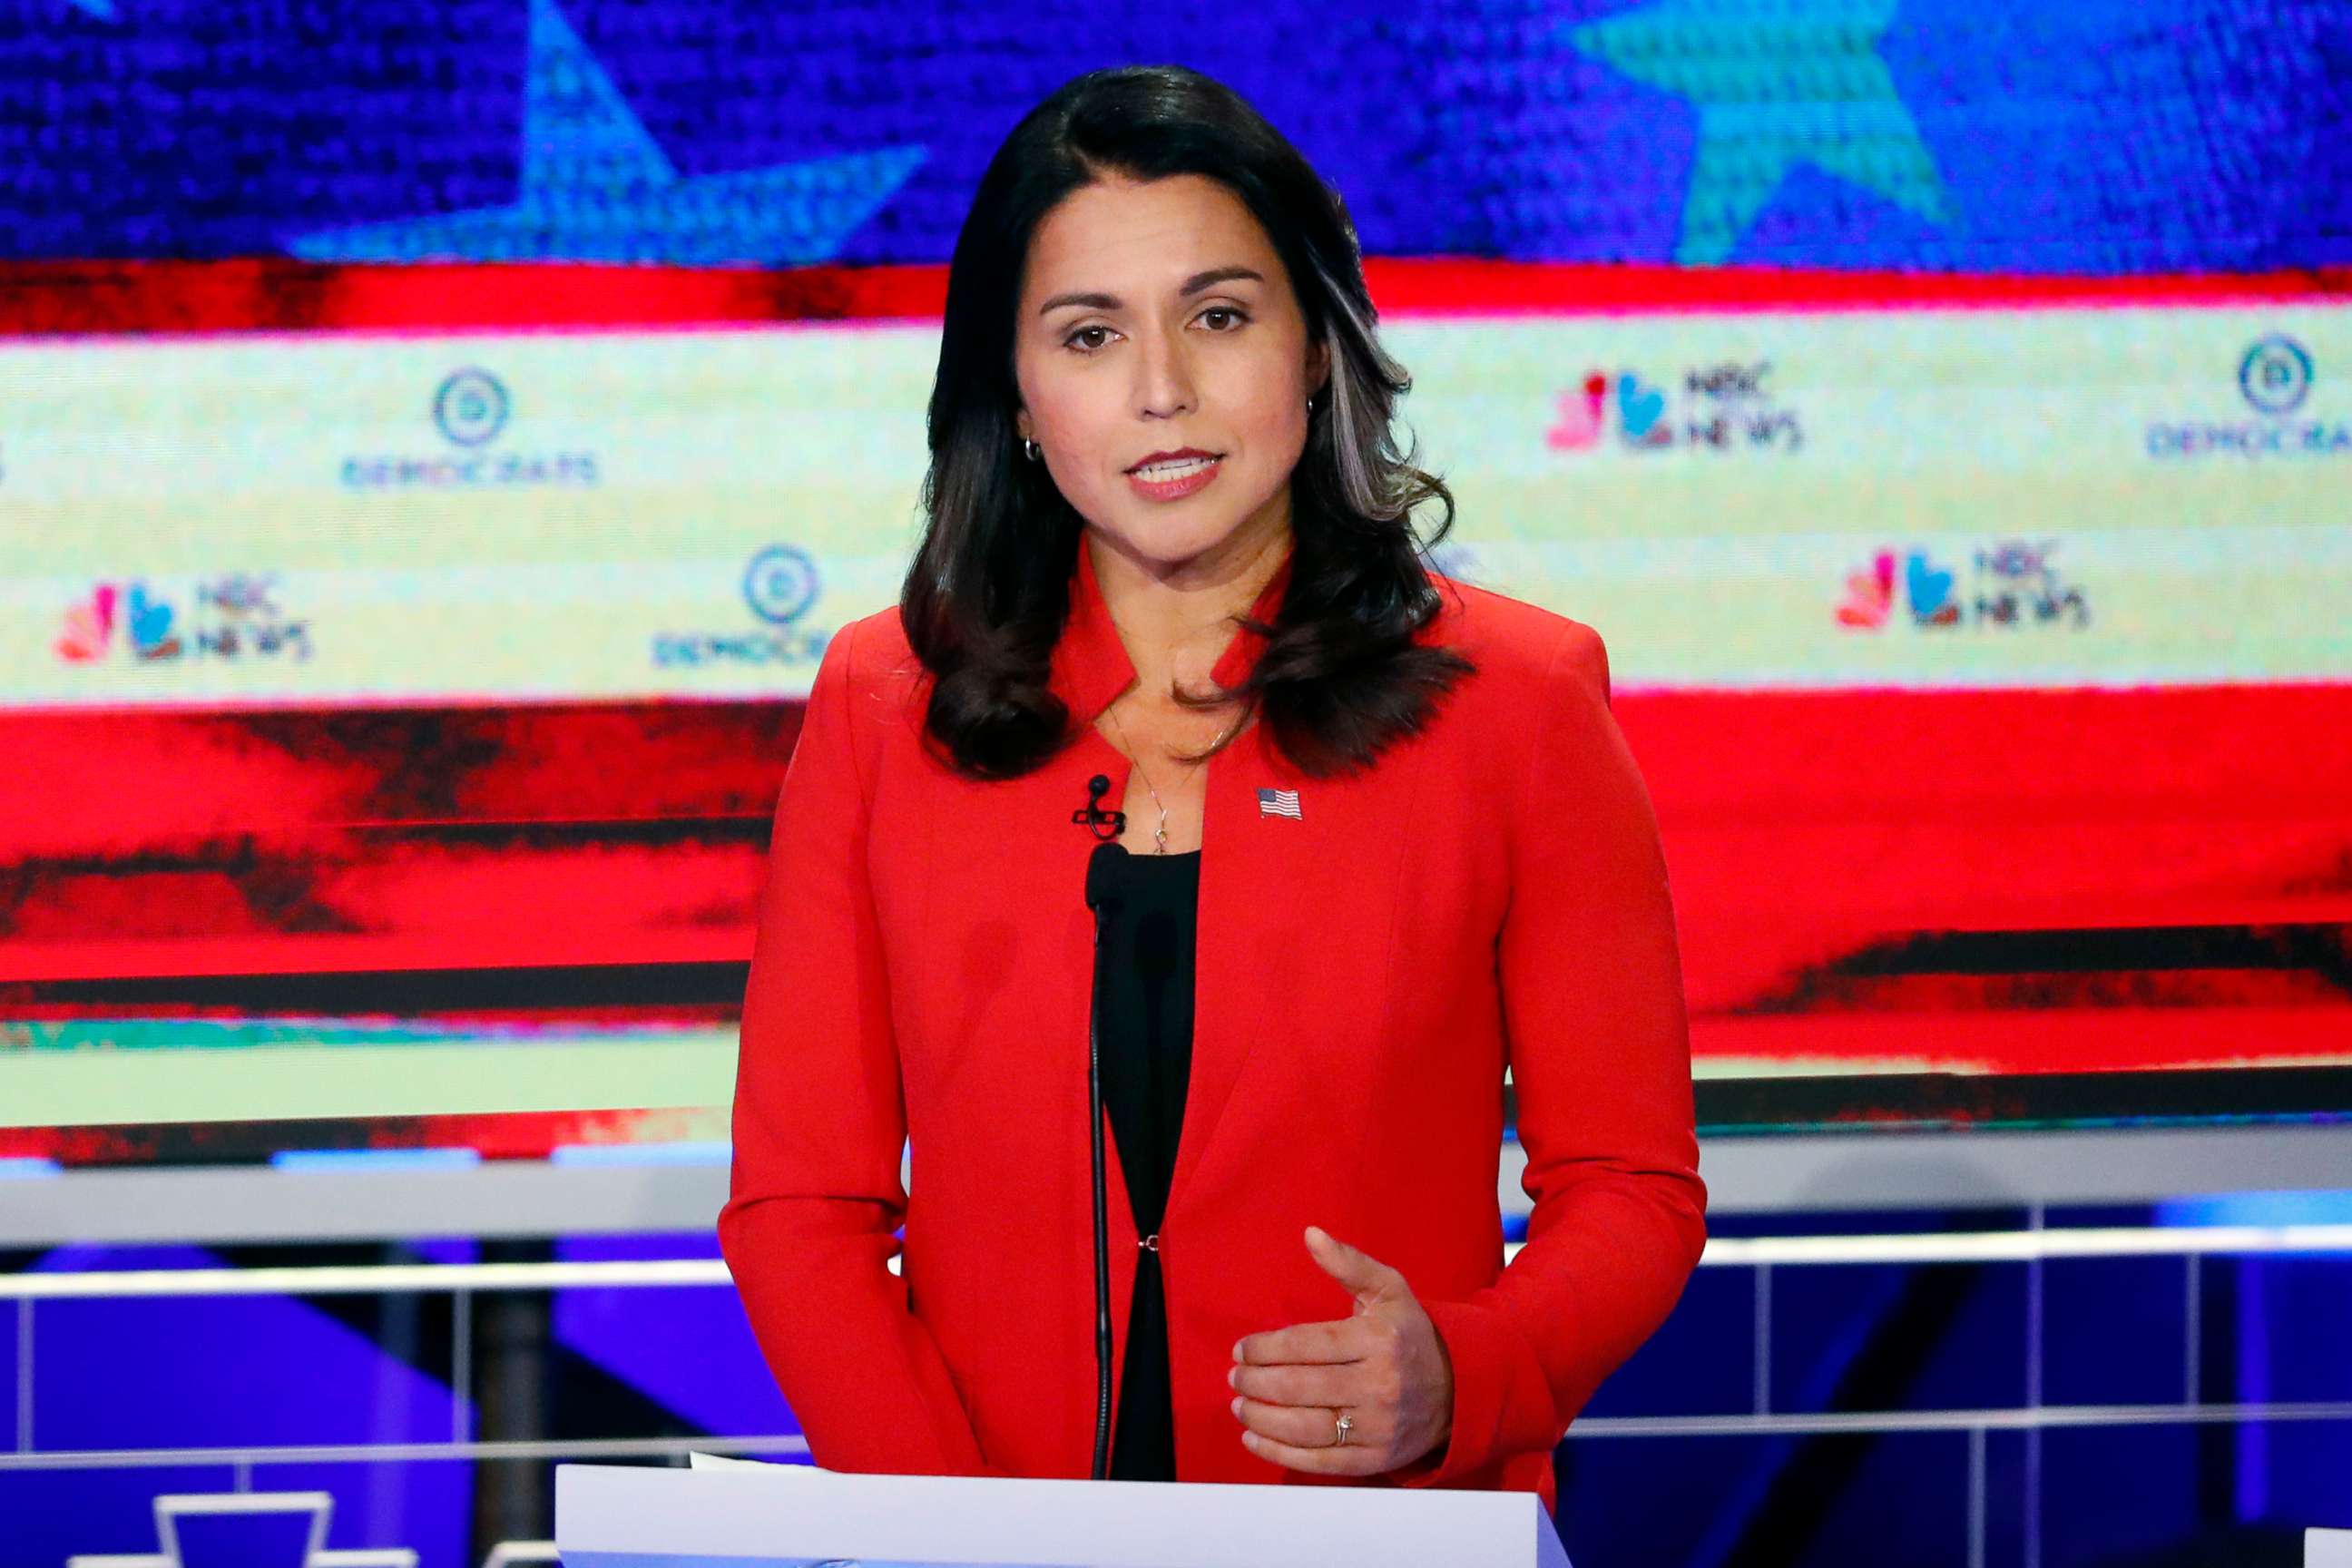 PHOTO: Tulsi Gabbard participates in the first Democratic primary debate hosted by NBC News at the Adrienne Arsht Center for the Performing Arts in Miami, Florida, June 26, 2019.